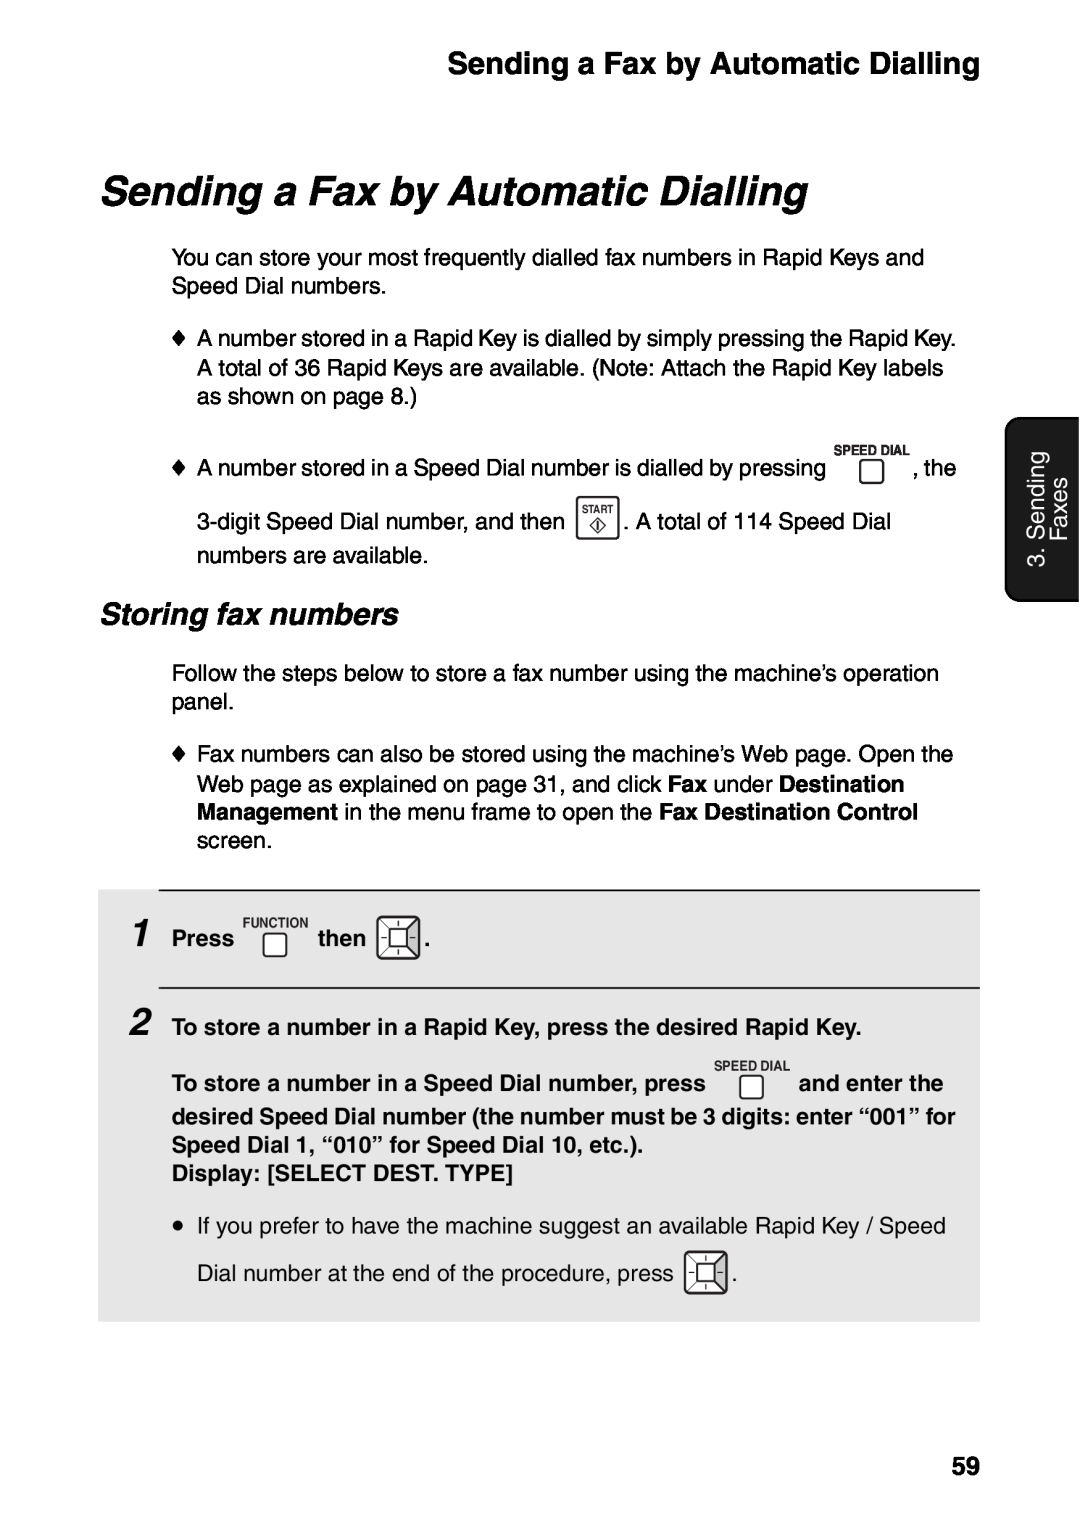 Sharp FO-IS115N operation manual Sending a Fax by Automatic Dialling, Storing fax numbers, Faxes 